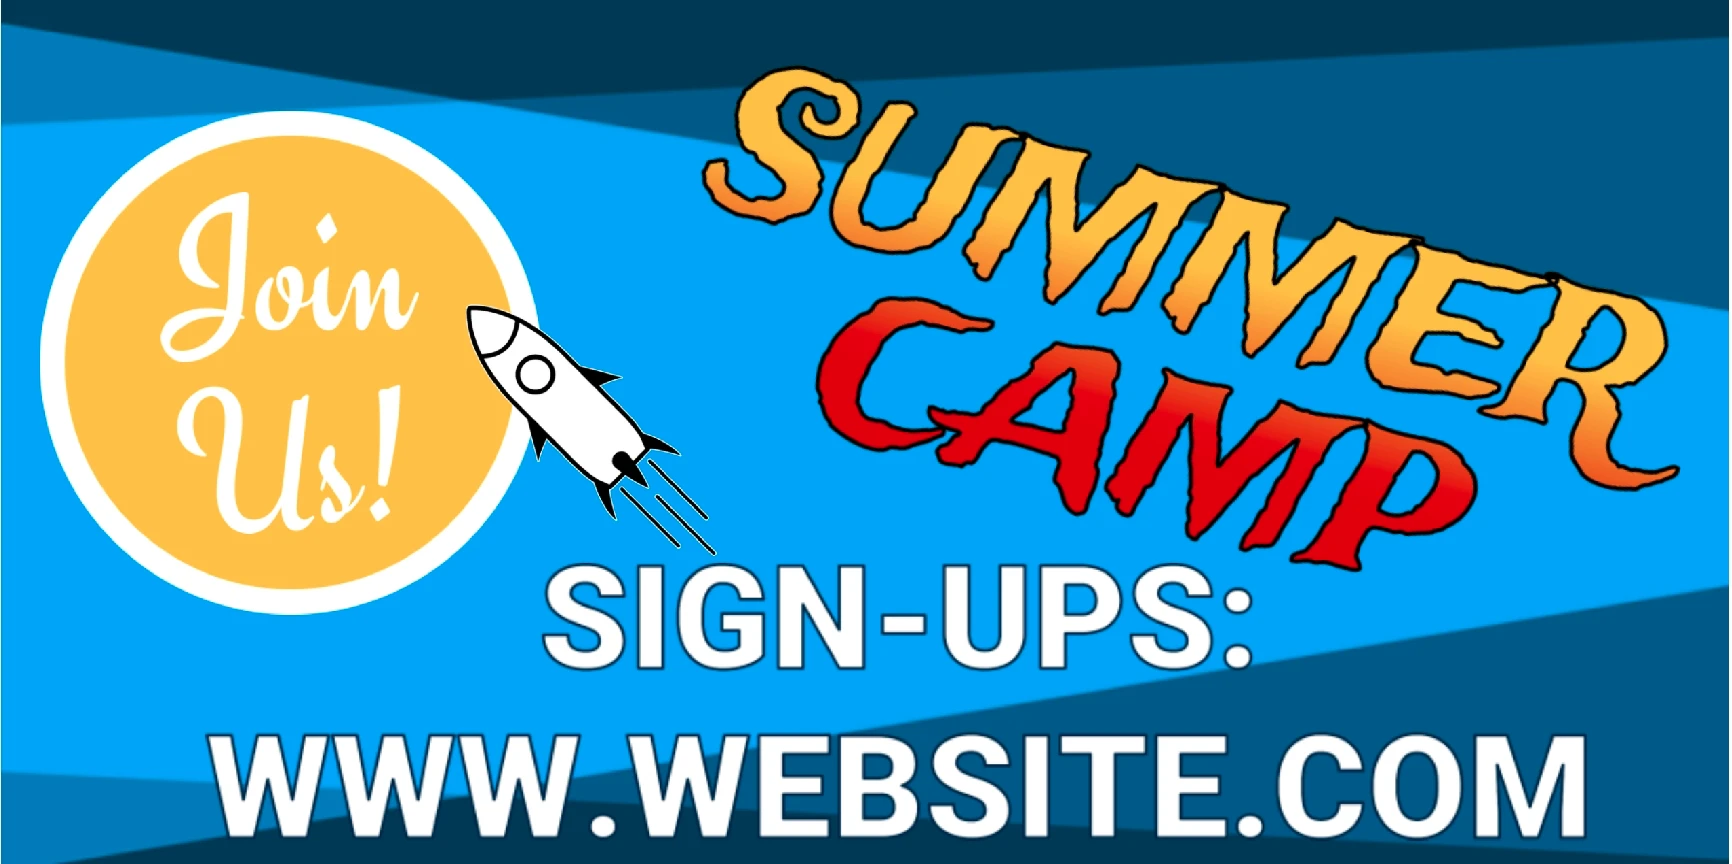 Summer camp event banner with signups website